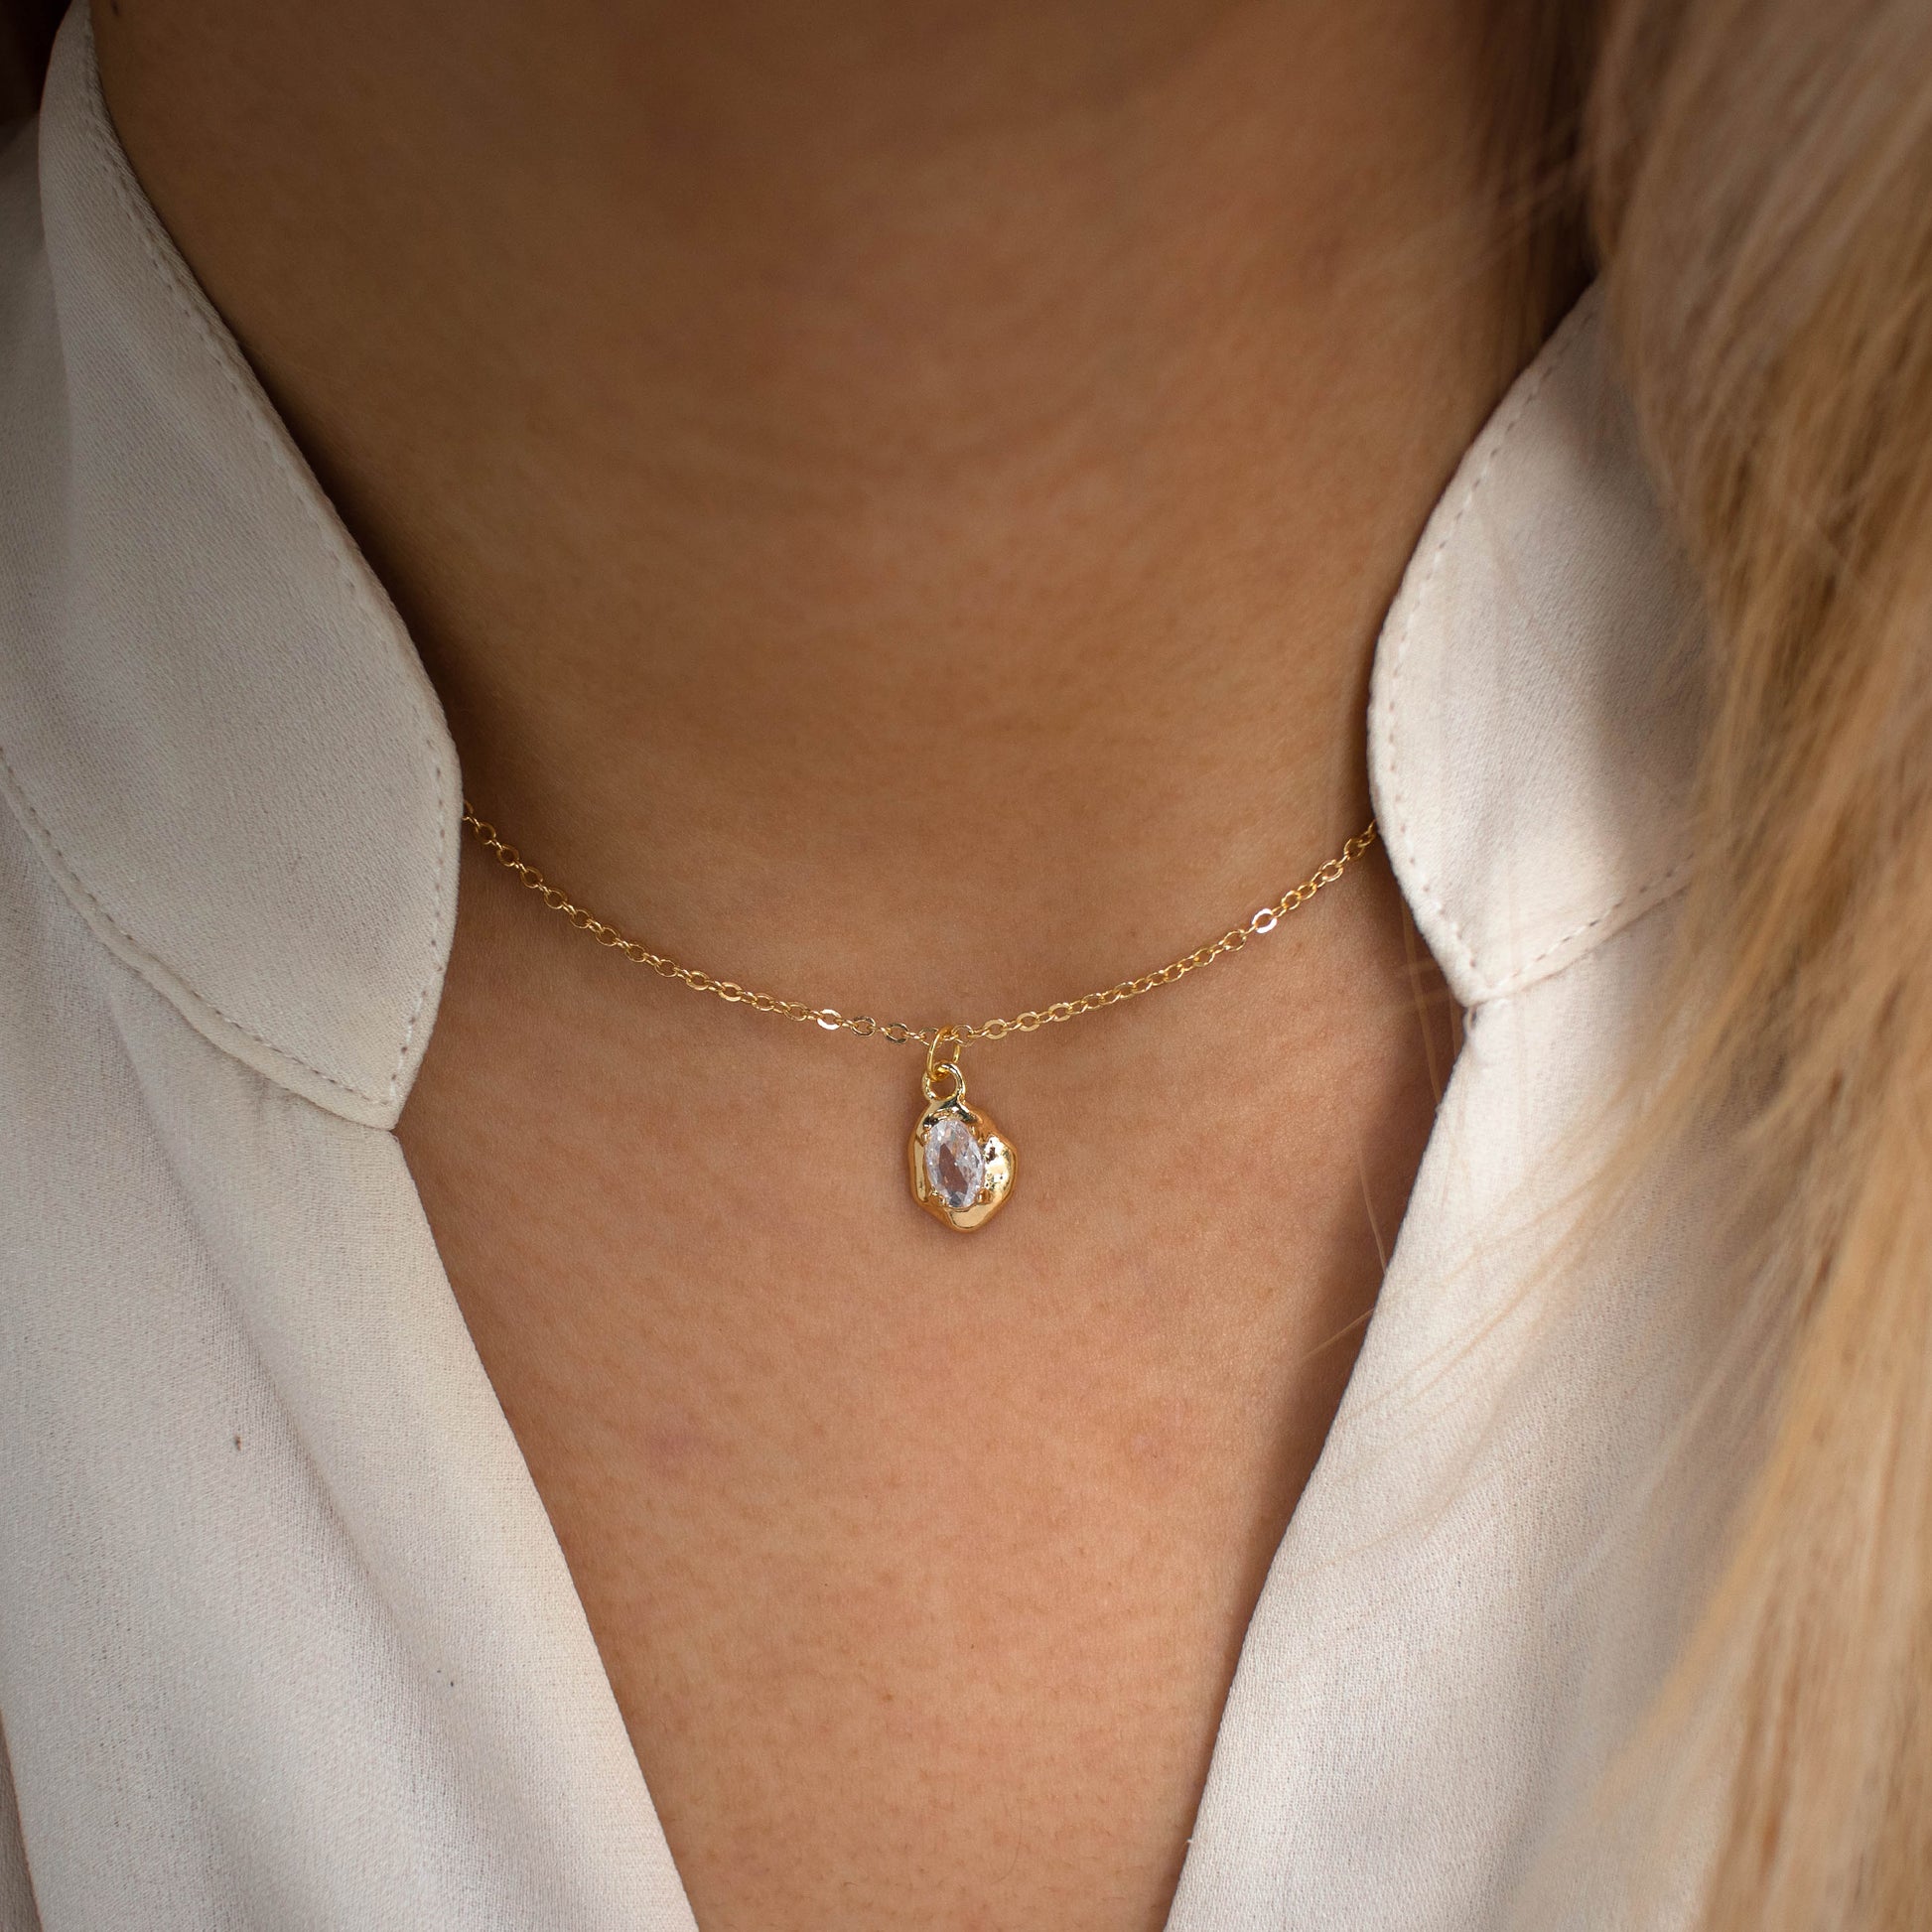 This photo features a thin chain necklace made of 14K gold-plated sterling silver, paired with a irregularly zircon.